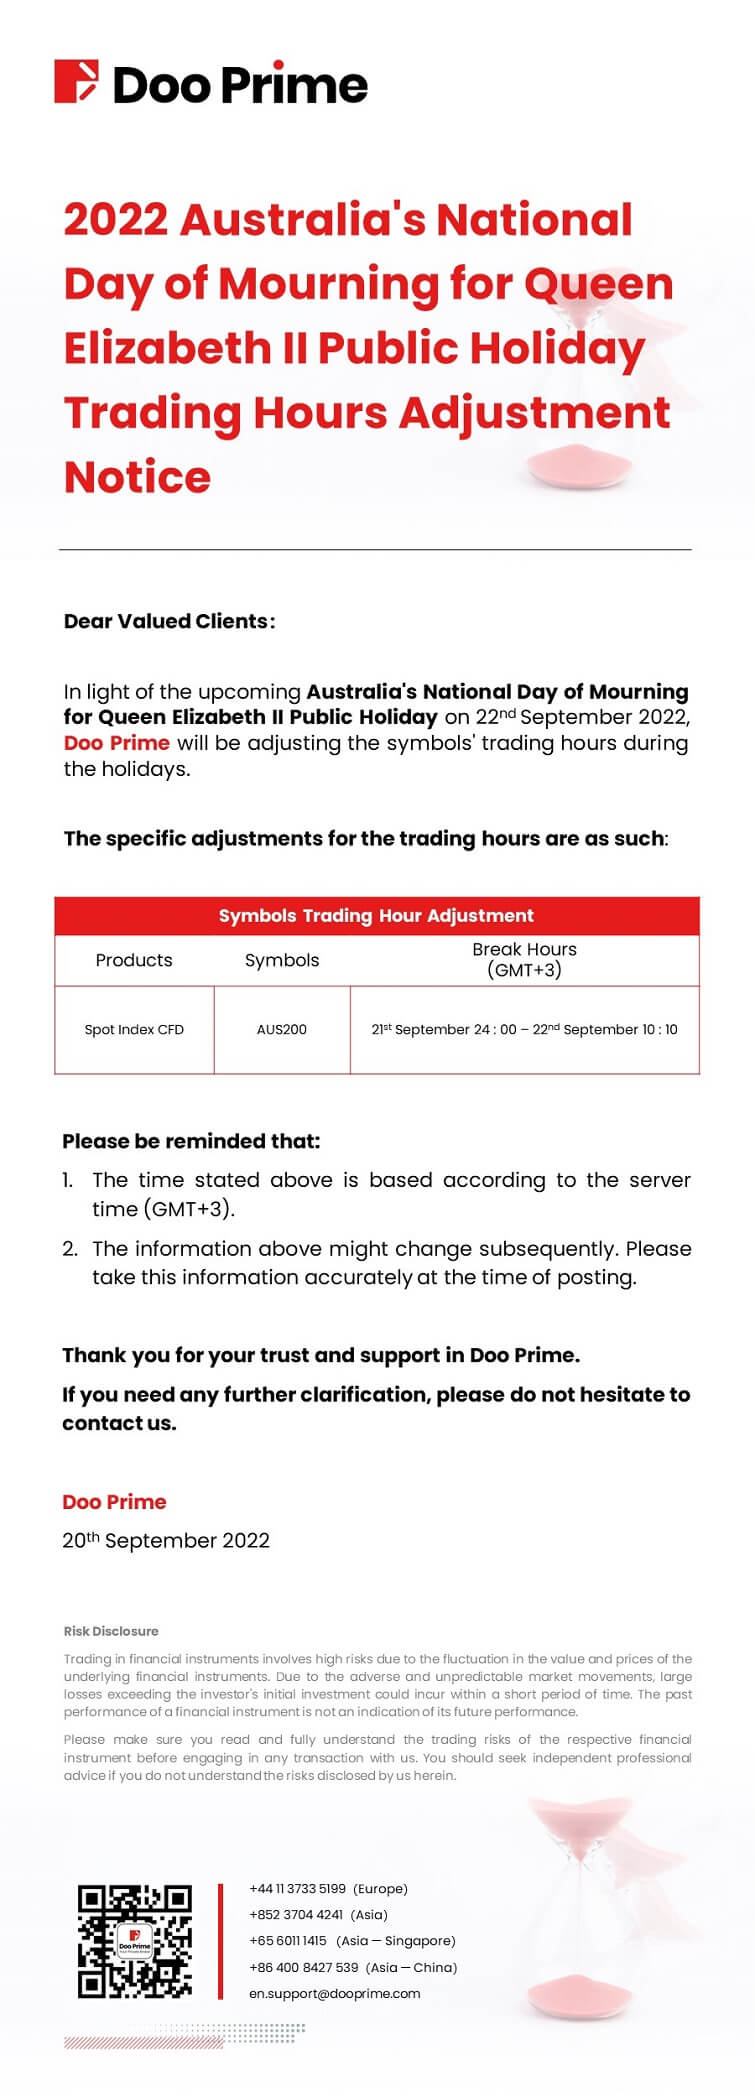 Doo Prime 2022 Australia’s National Day of Mourning for Queen Elizabeth II Public Holiday Trading Hours Adjustment Notice